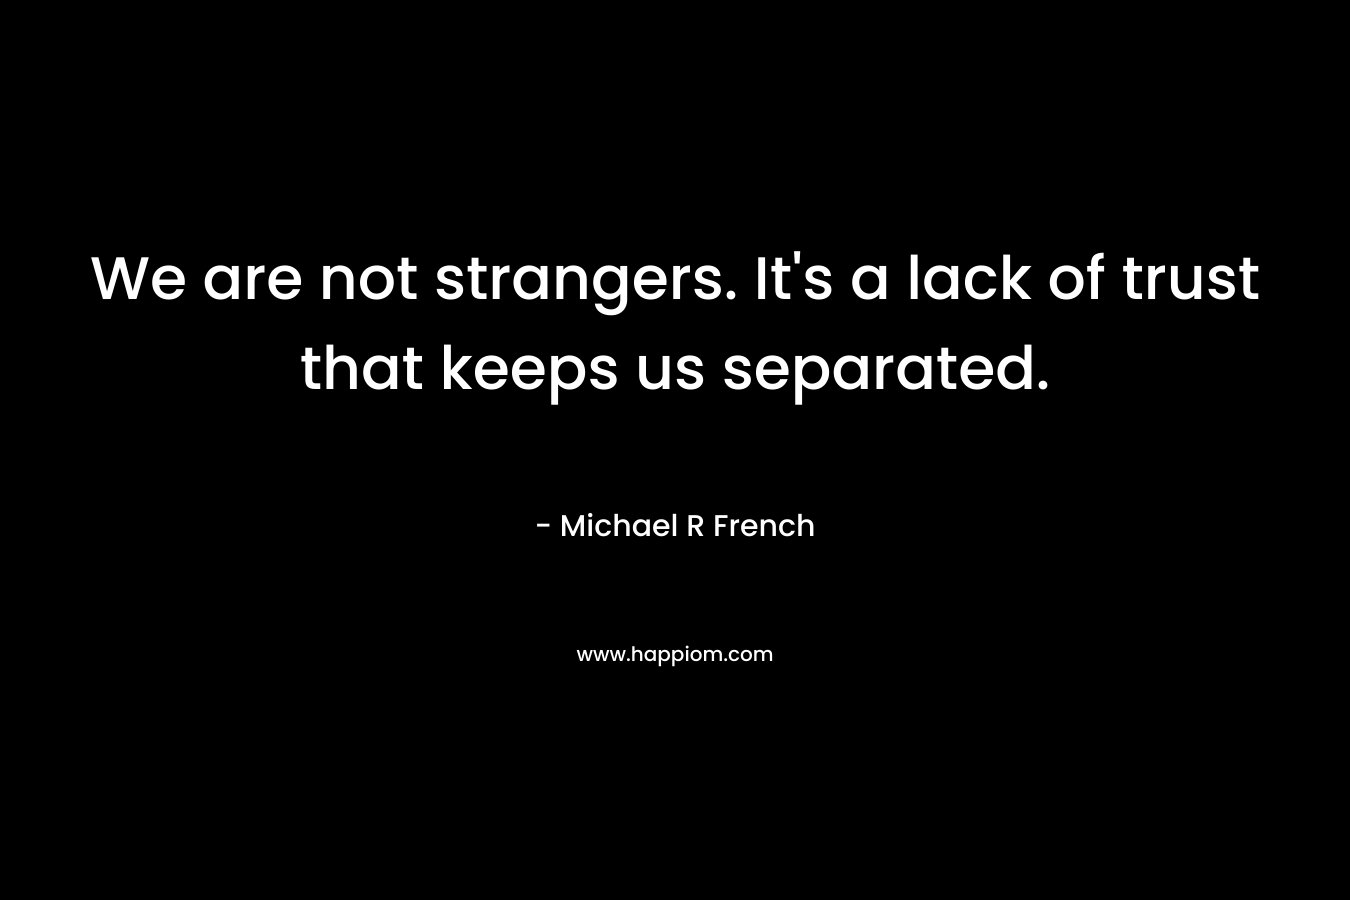 We are not strangers. It's a lack of trust that keeps us separated.